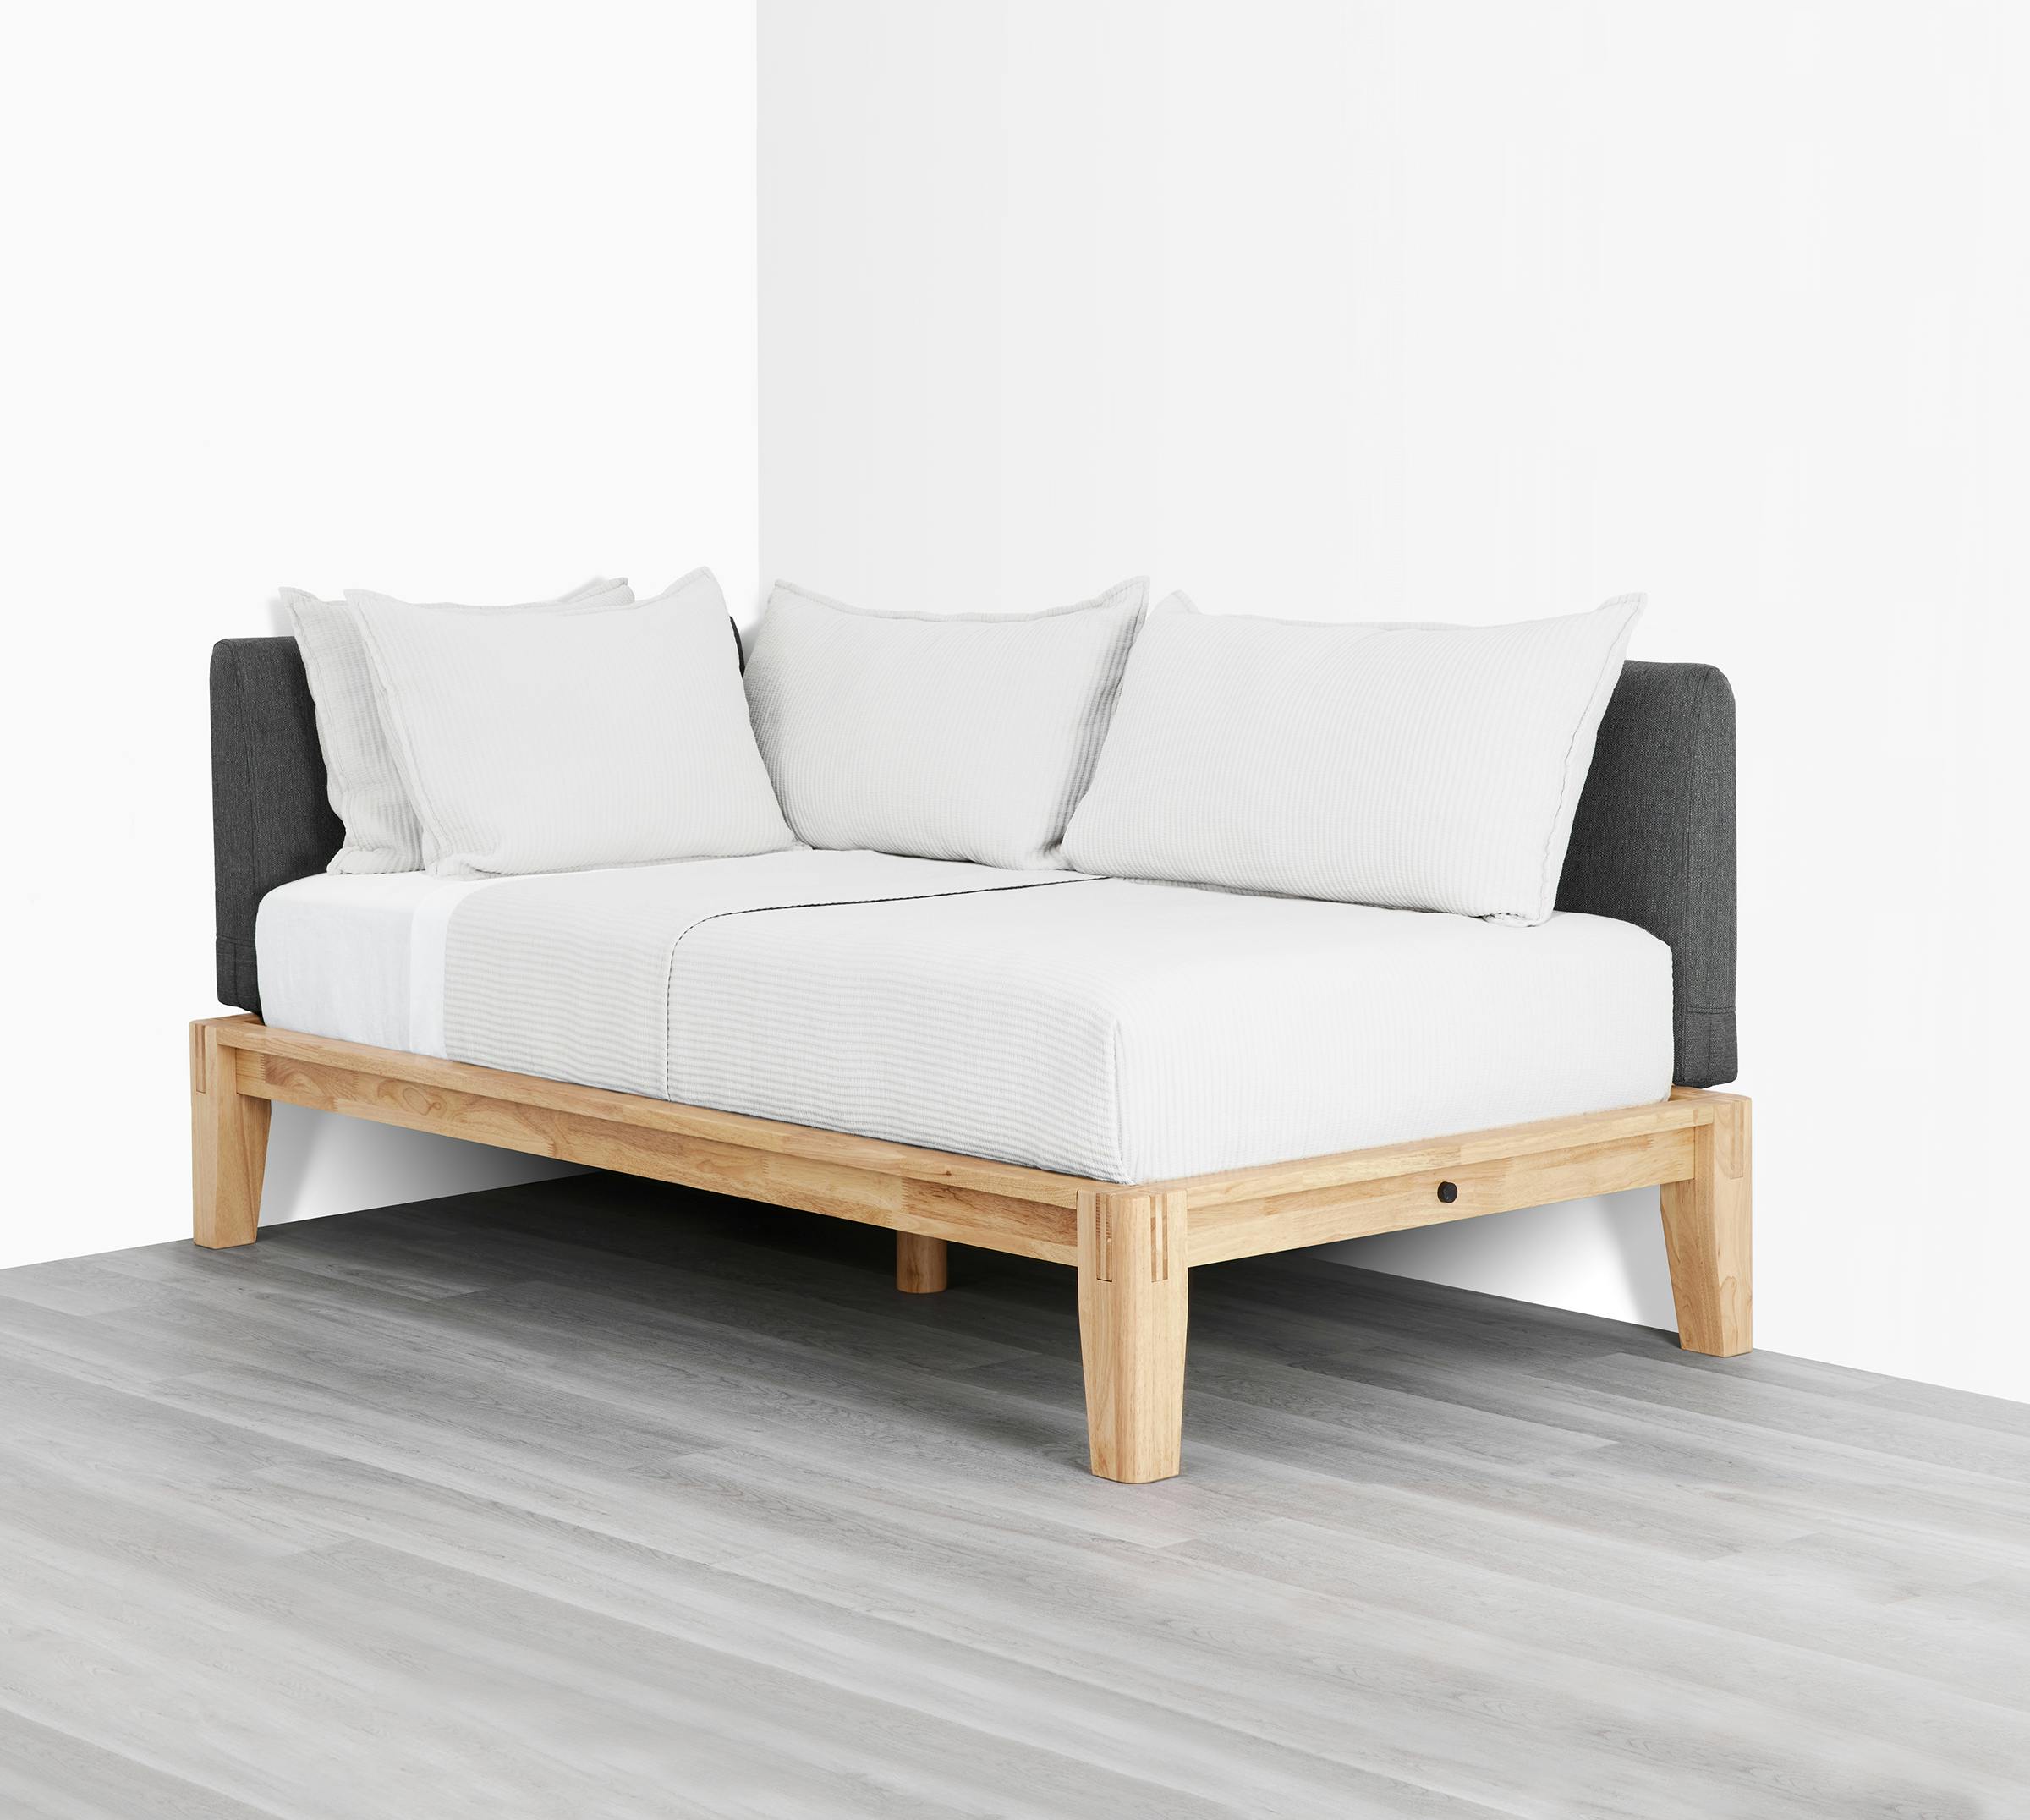 The Bed (Daybed / Natural / Dark Charcoal) - Diagonal 2